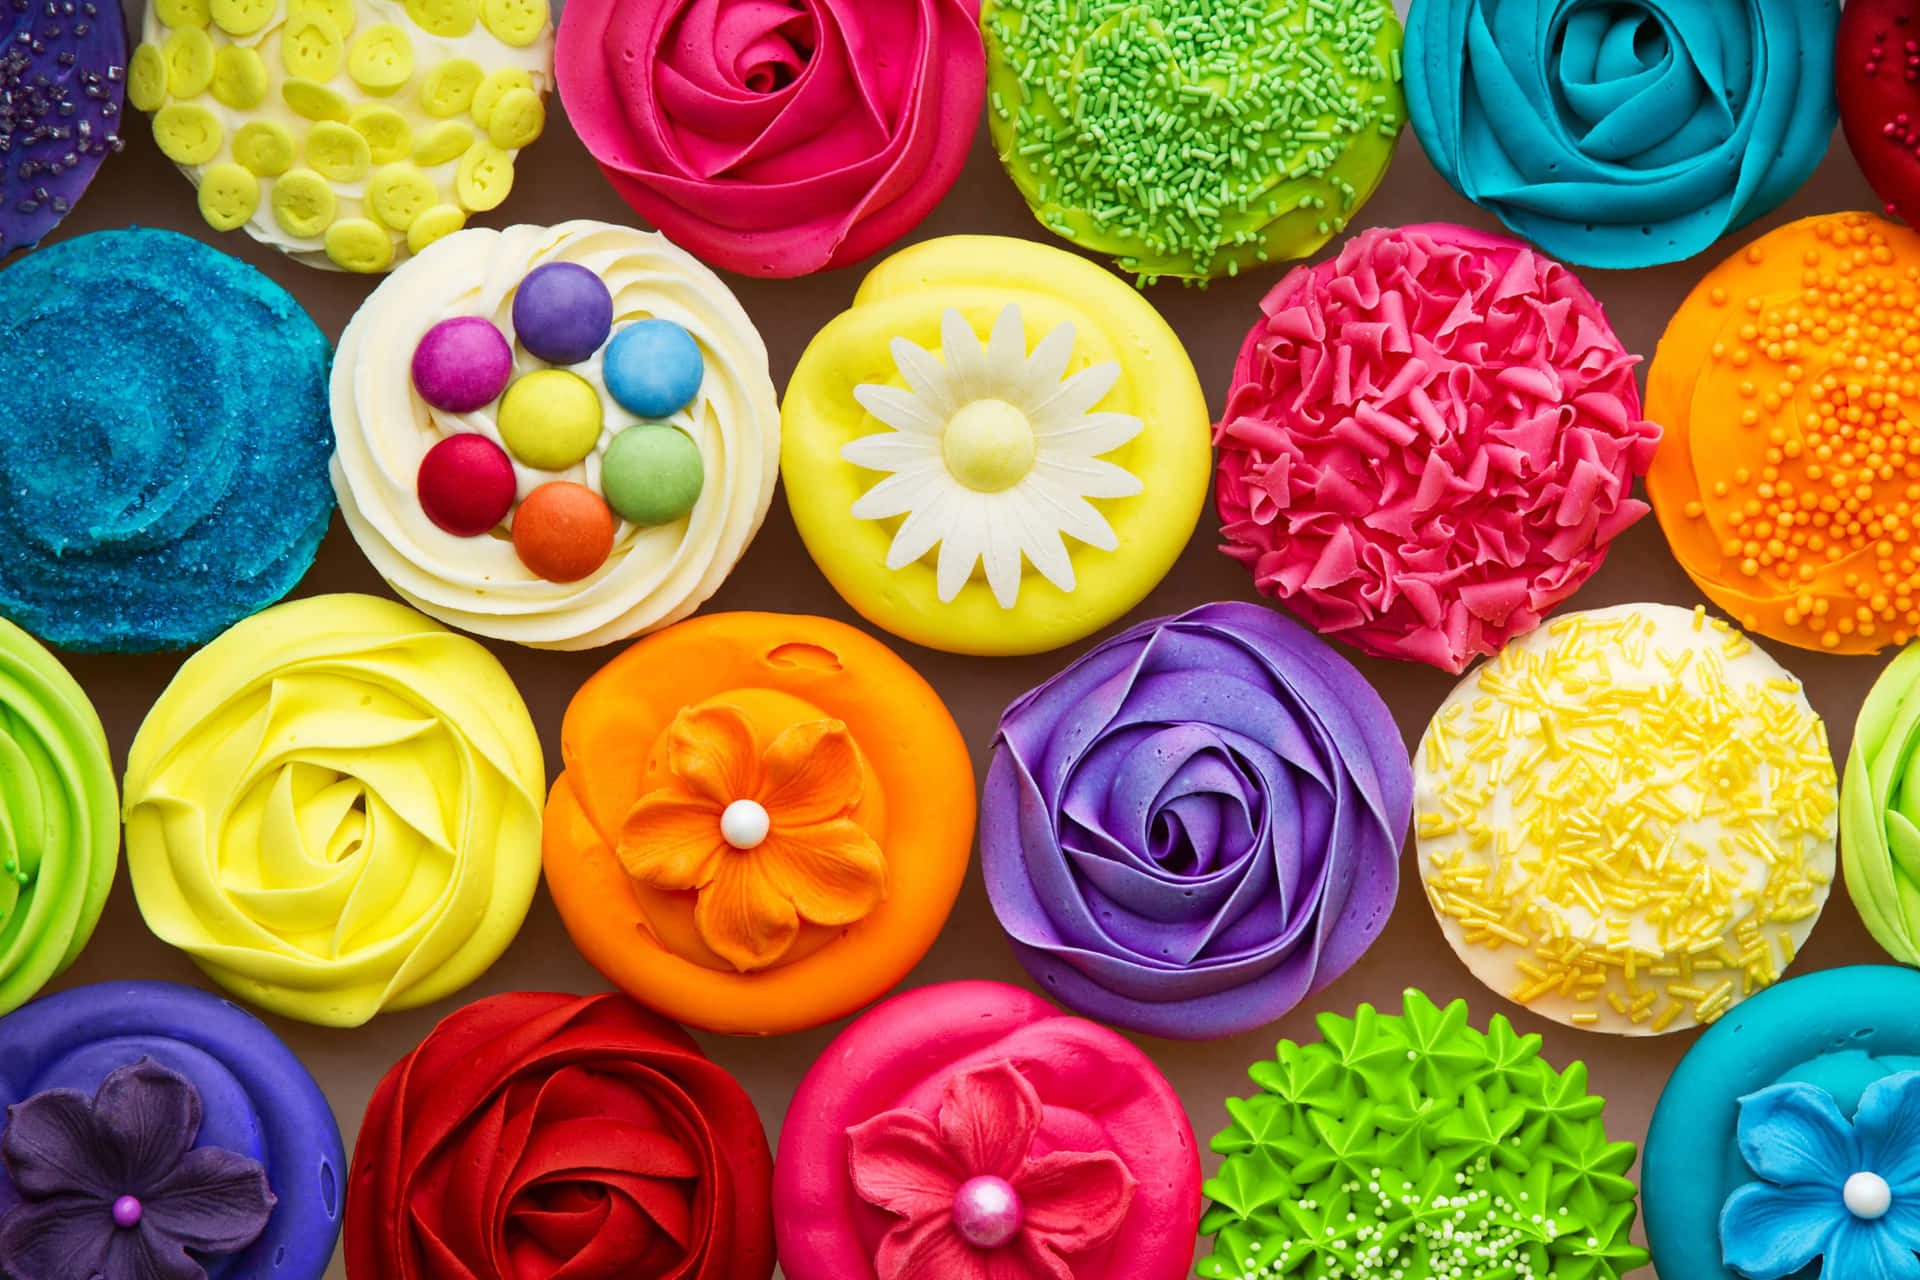 A Colorful Arrangement Of Cupcakes With Flowers